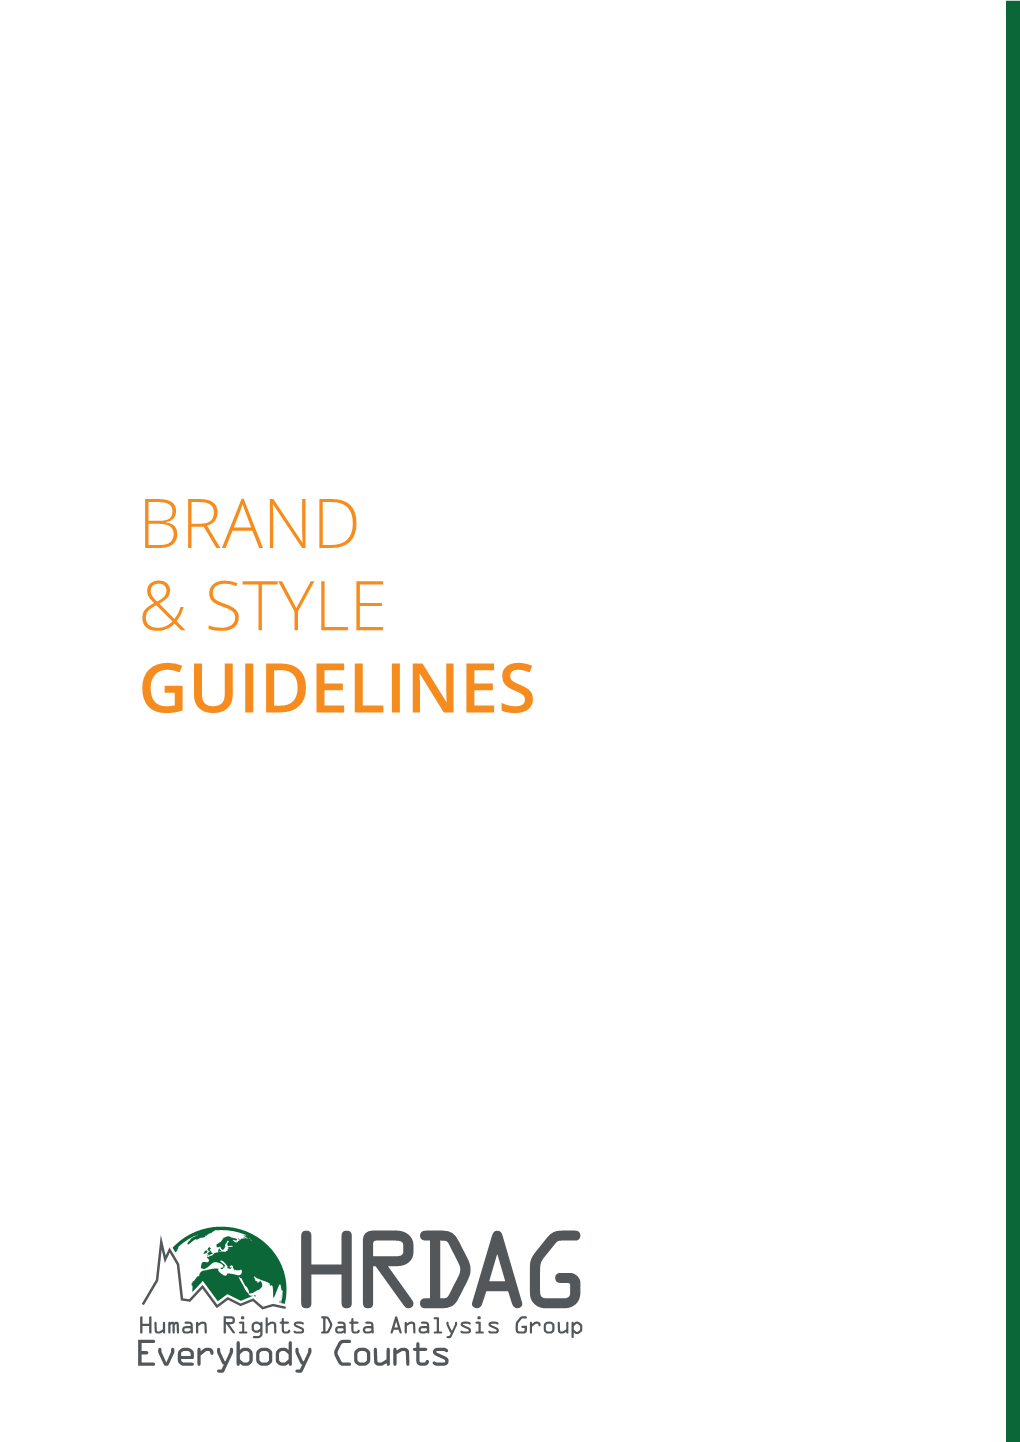 Brand & Style Guidelines